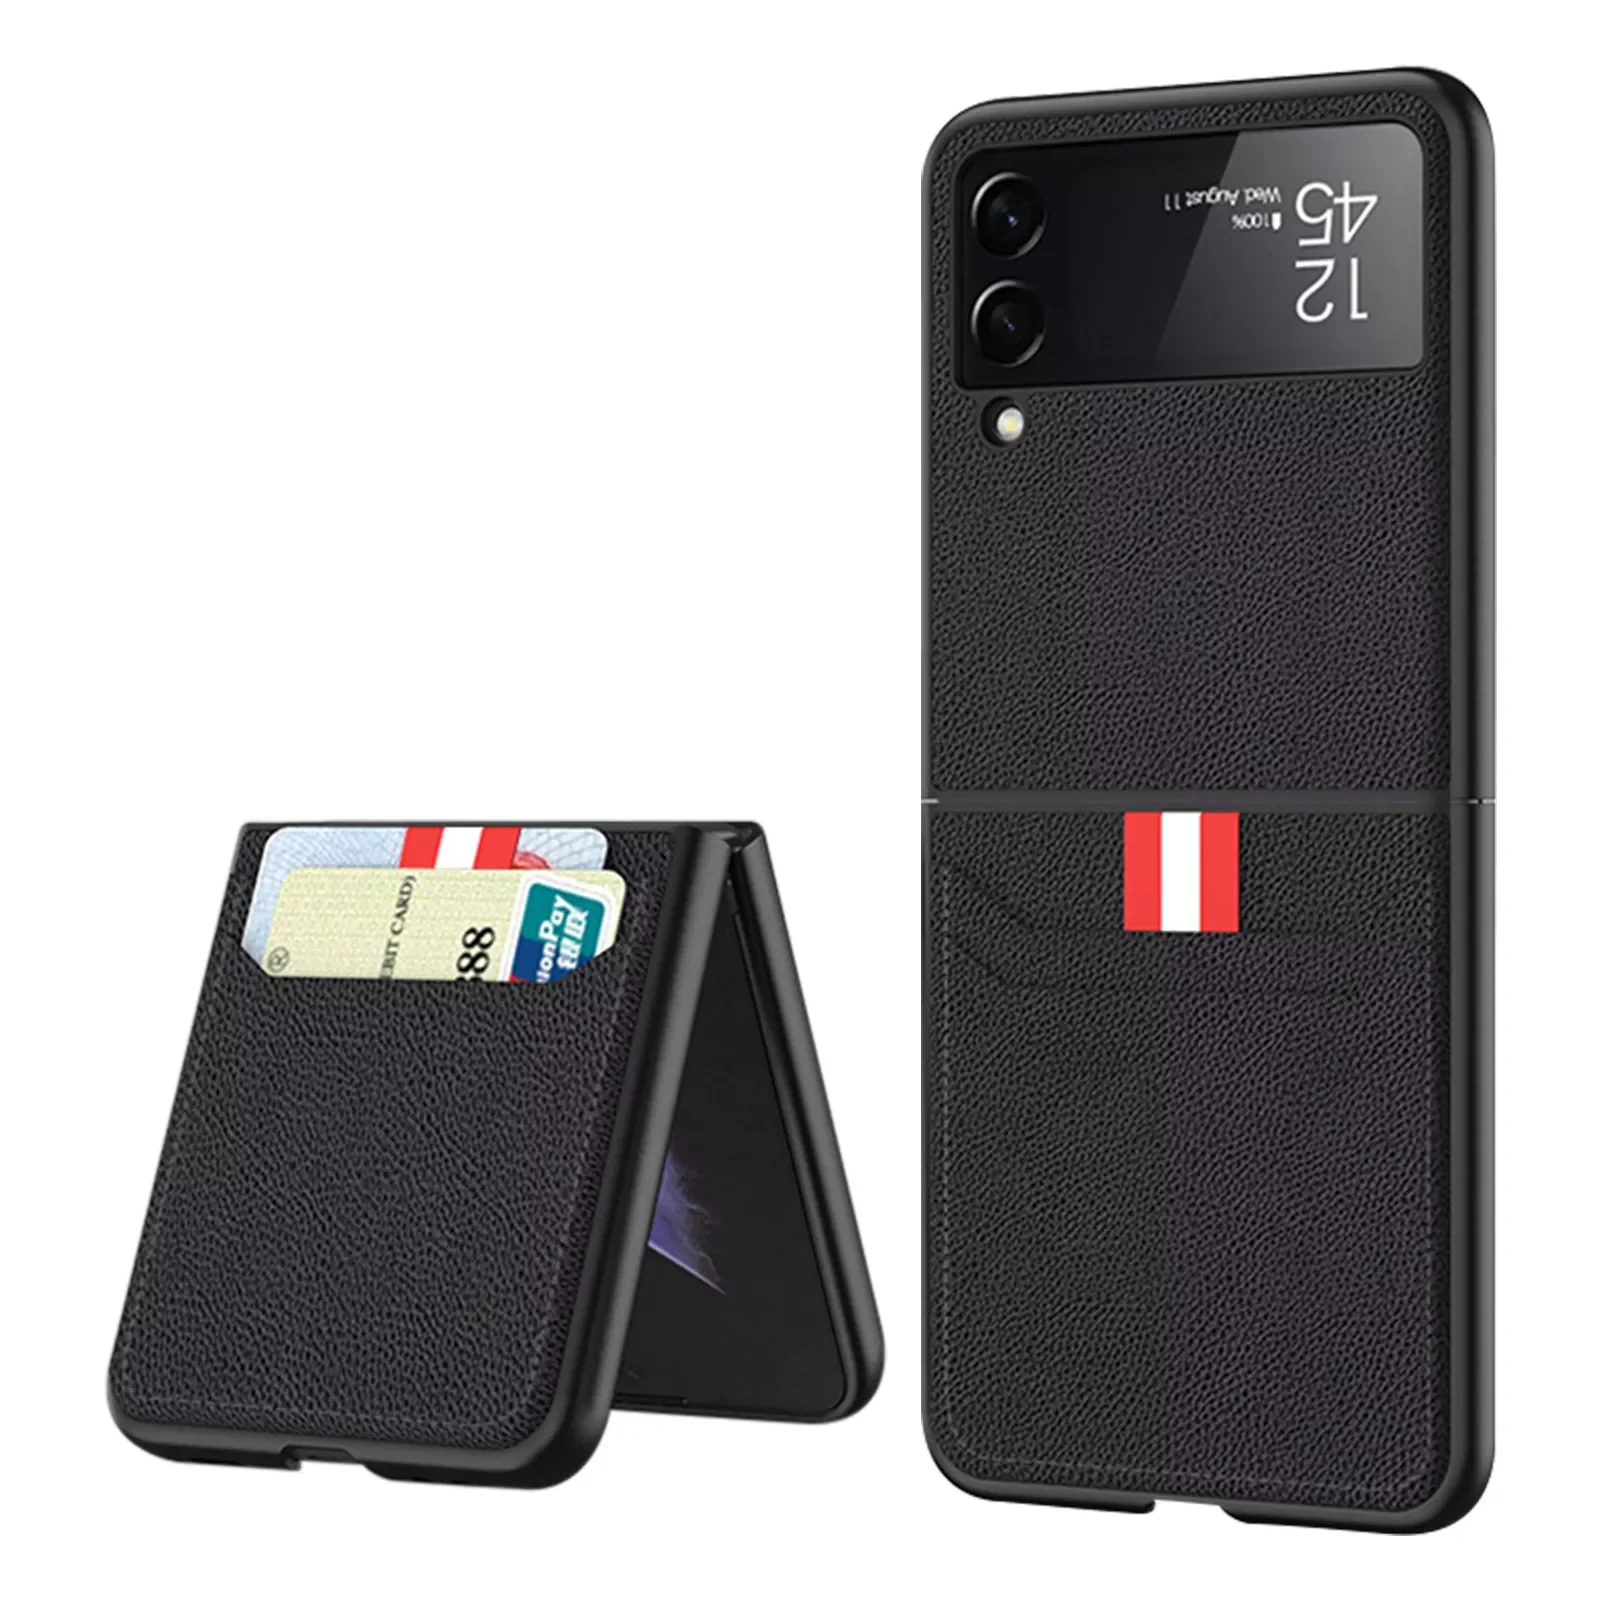 Wallet Case  Galaxy 5G PU Leather Case With Card Holders And Ultra-Thin Shell Protective Phone Cover